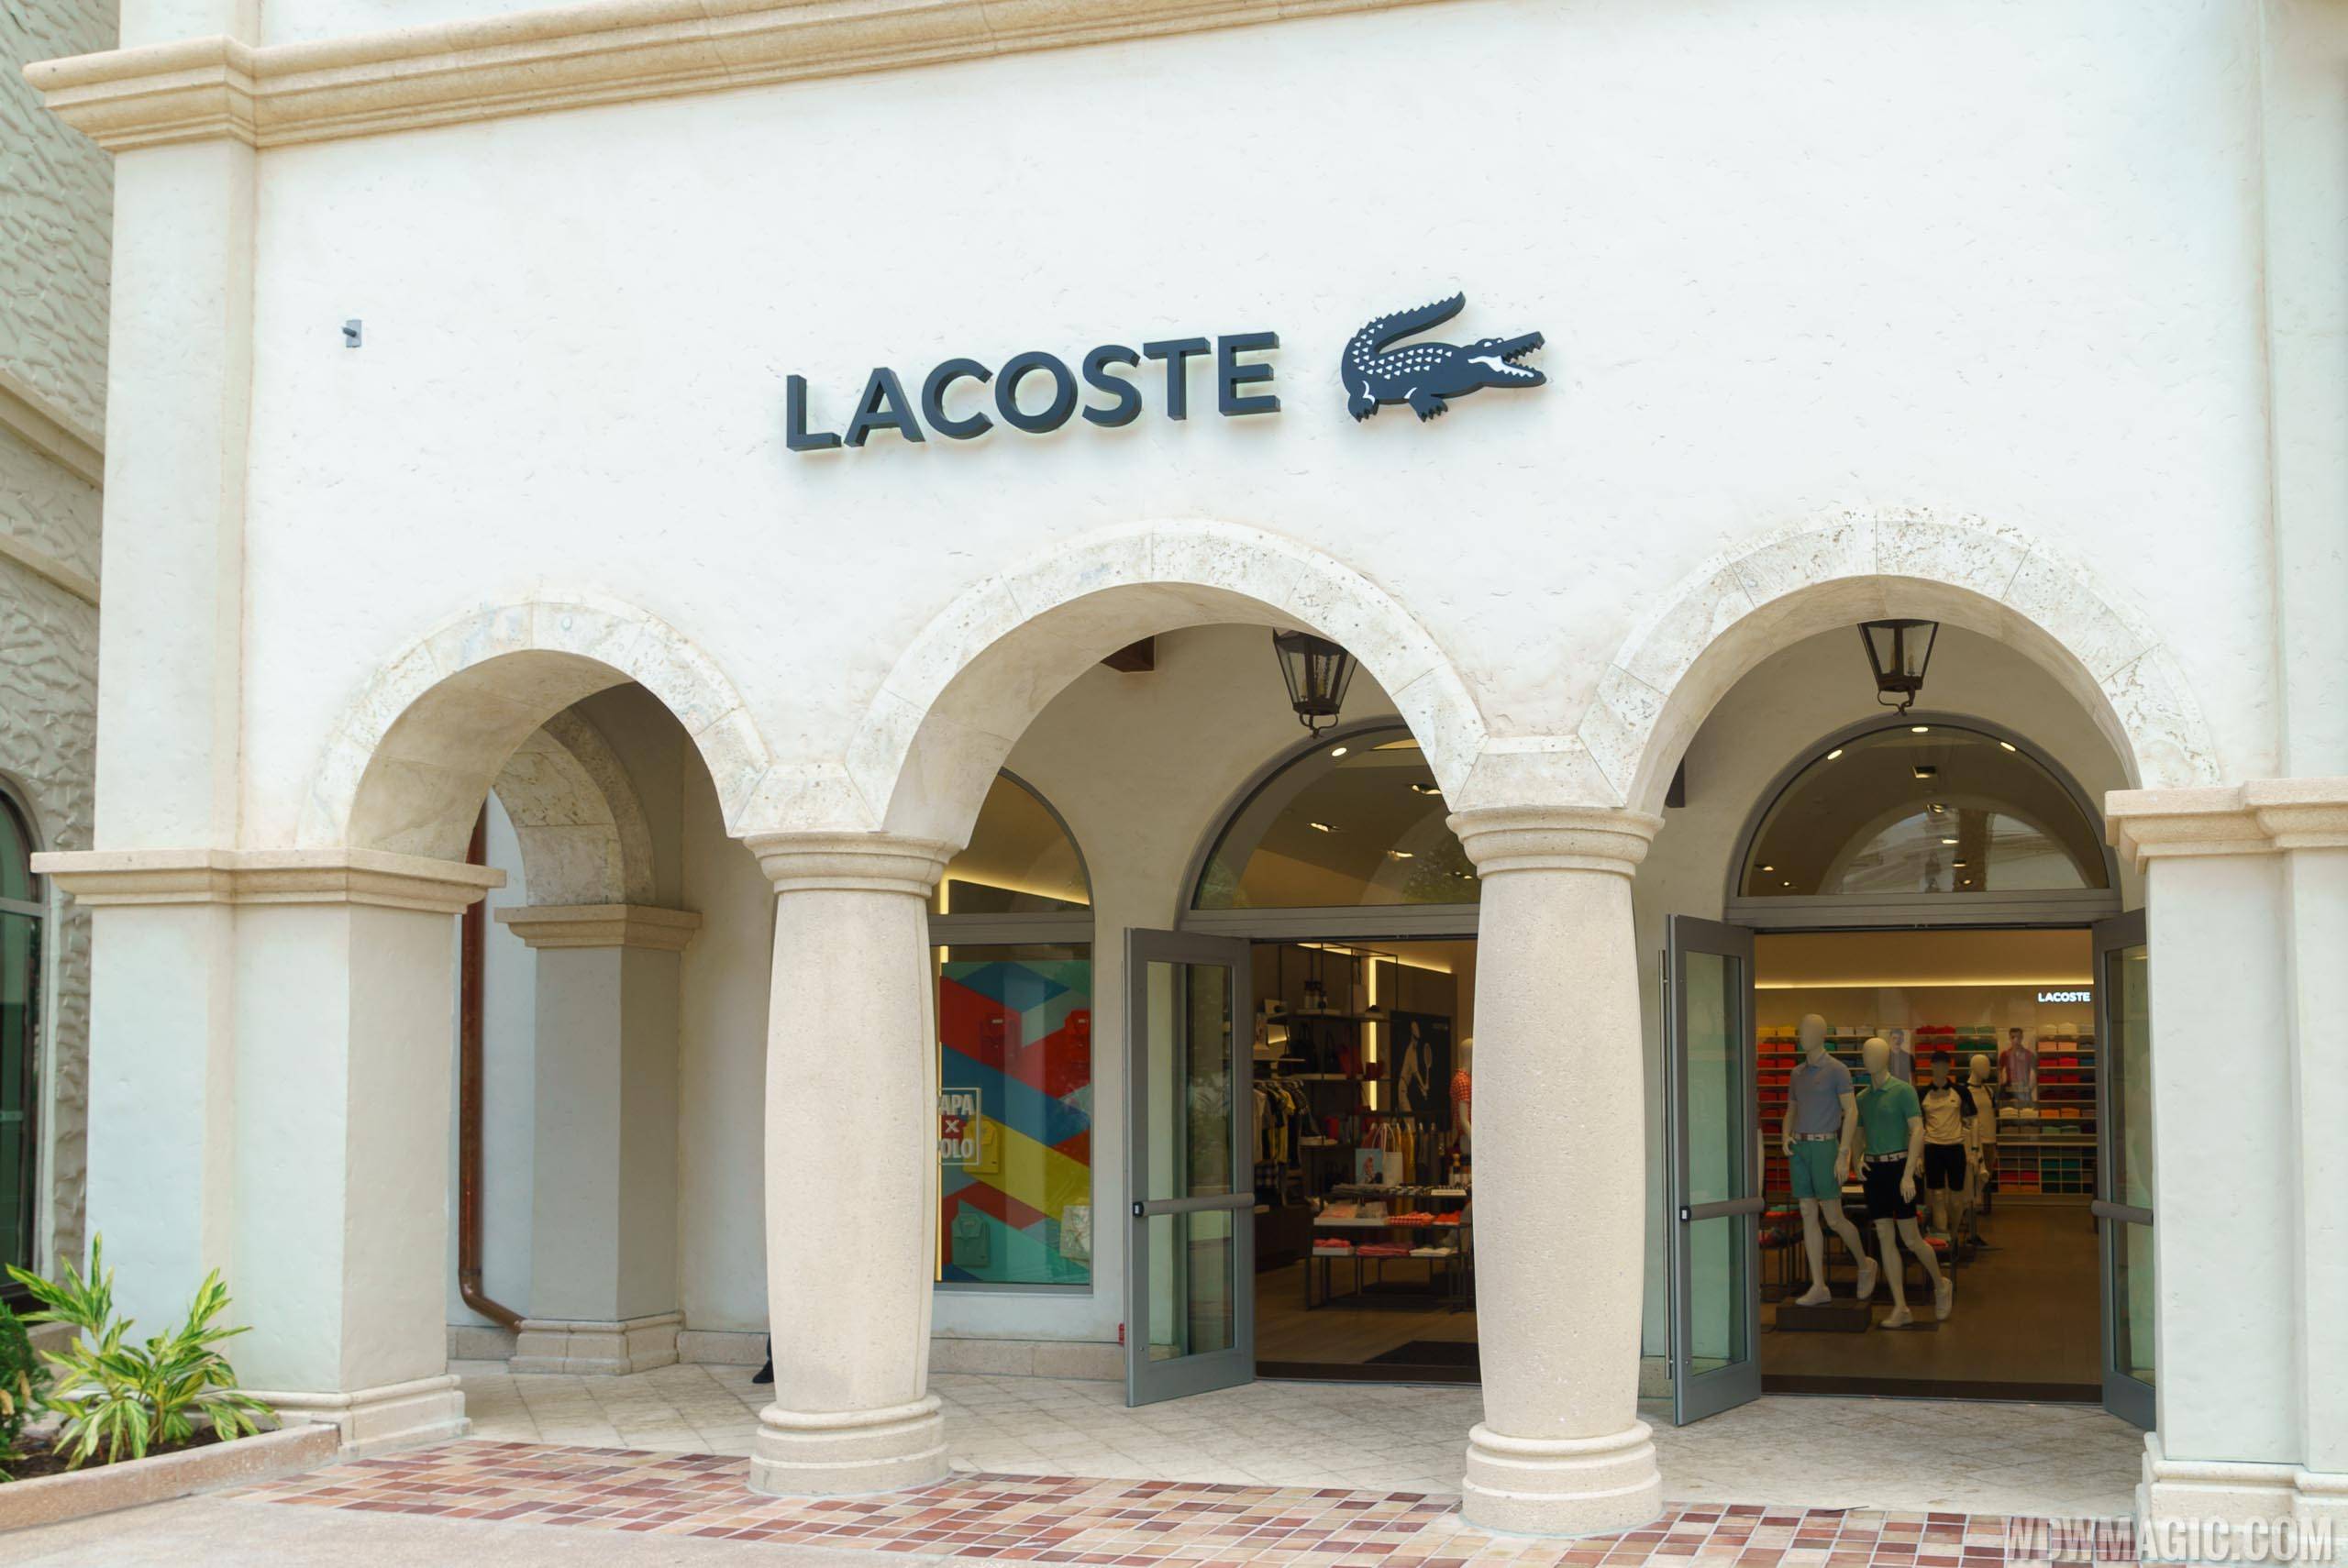 Lacoste store front at Disney Springs